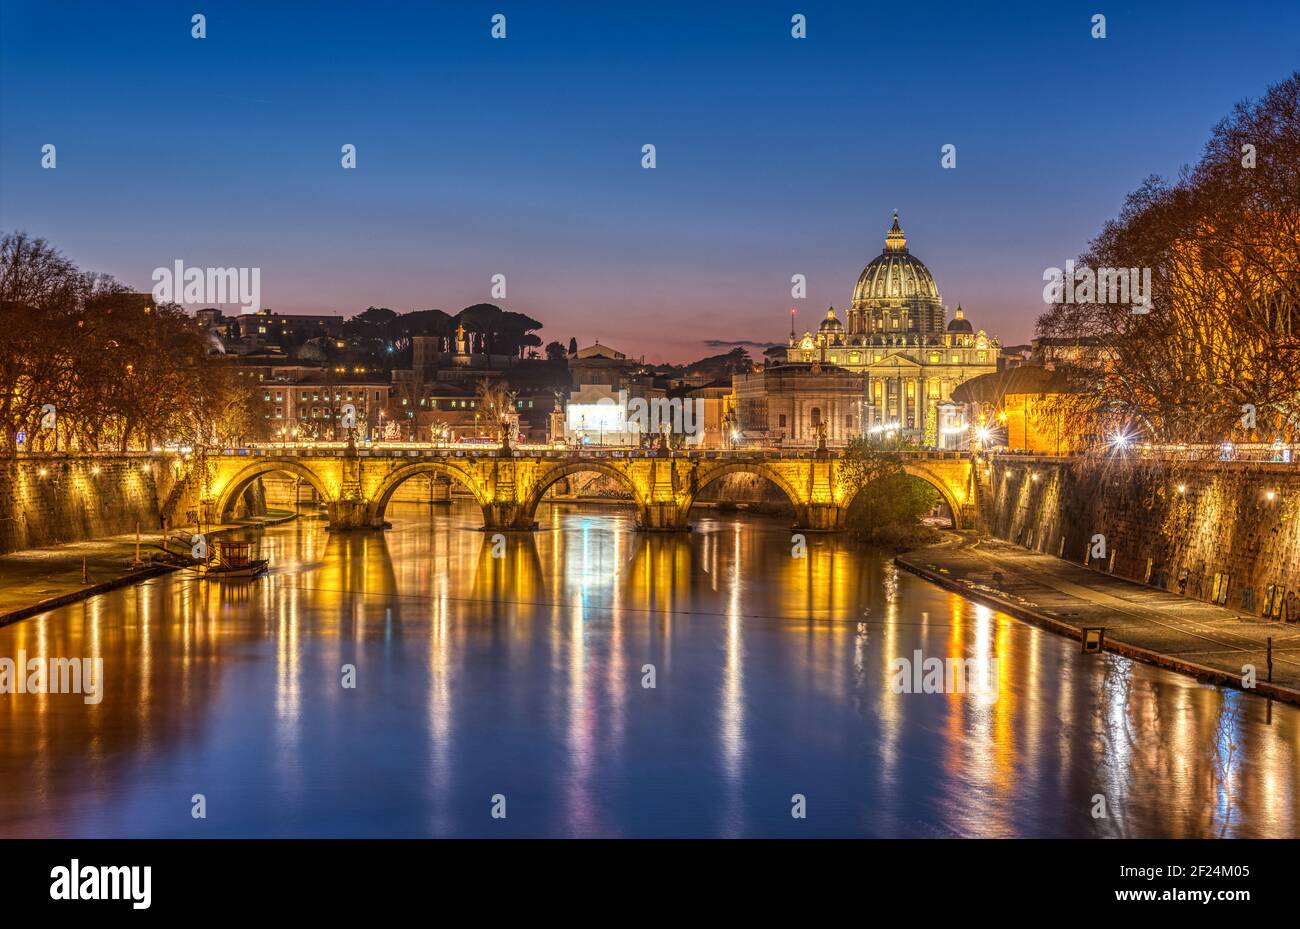 The Tiber river and St. Peters Basilica in the Vatican City, Italy, at twilight Stock Photo